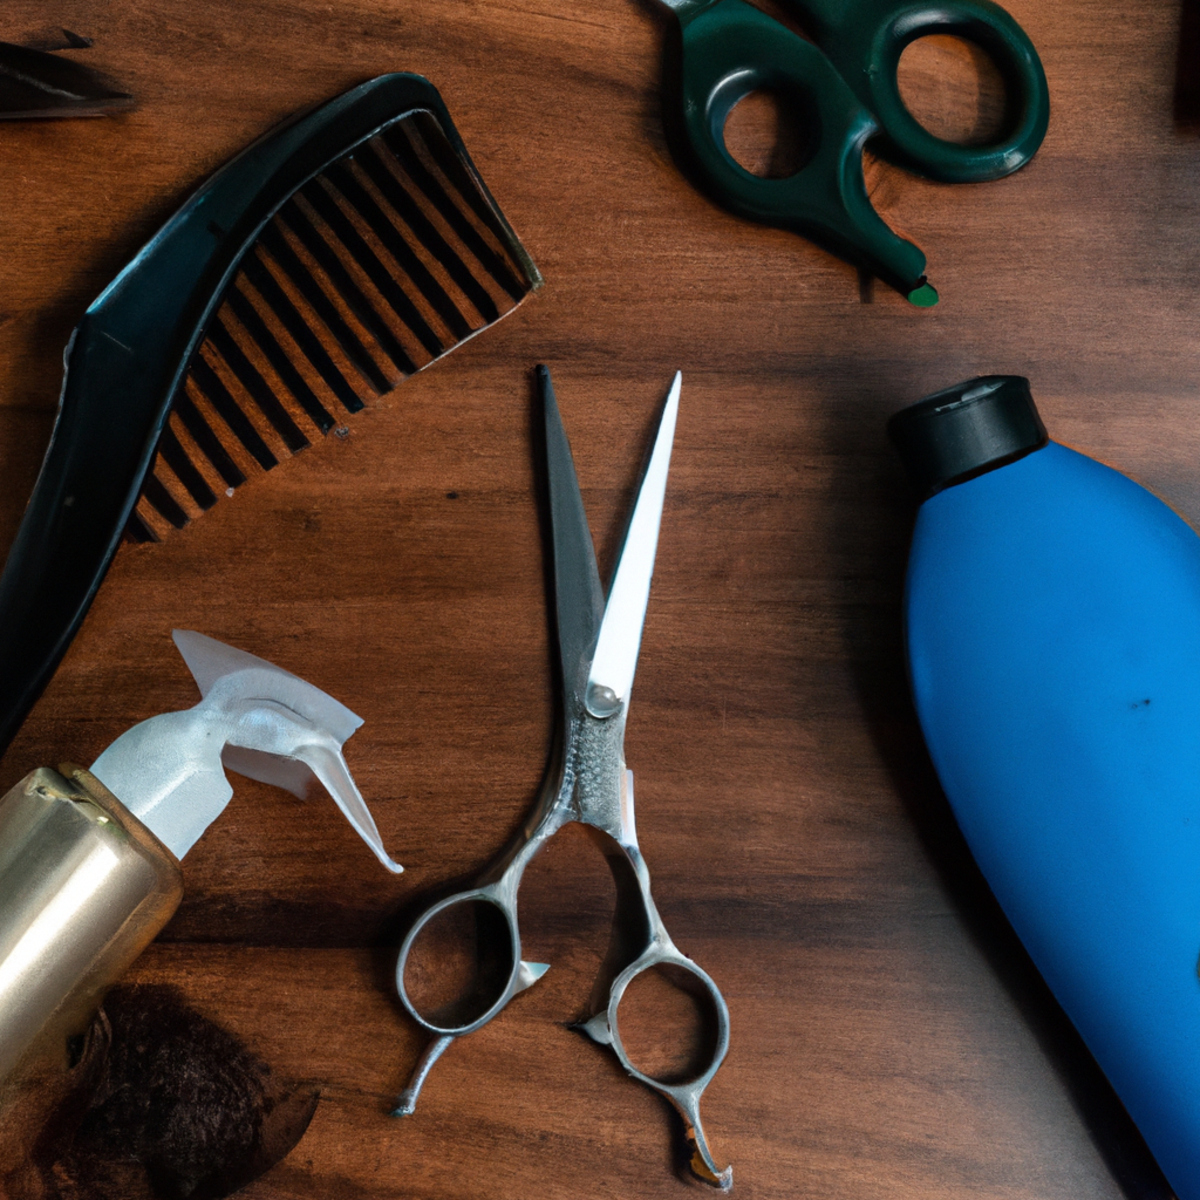 Hair care essentials on wooden table with scissors, comb, brush, hair oil, mask, dryer, and curling iron.